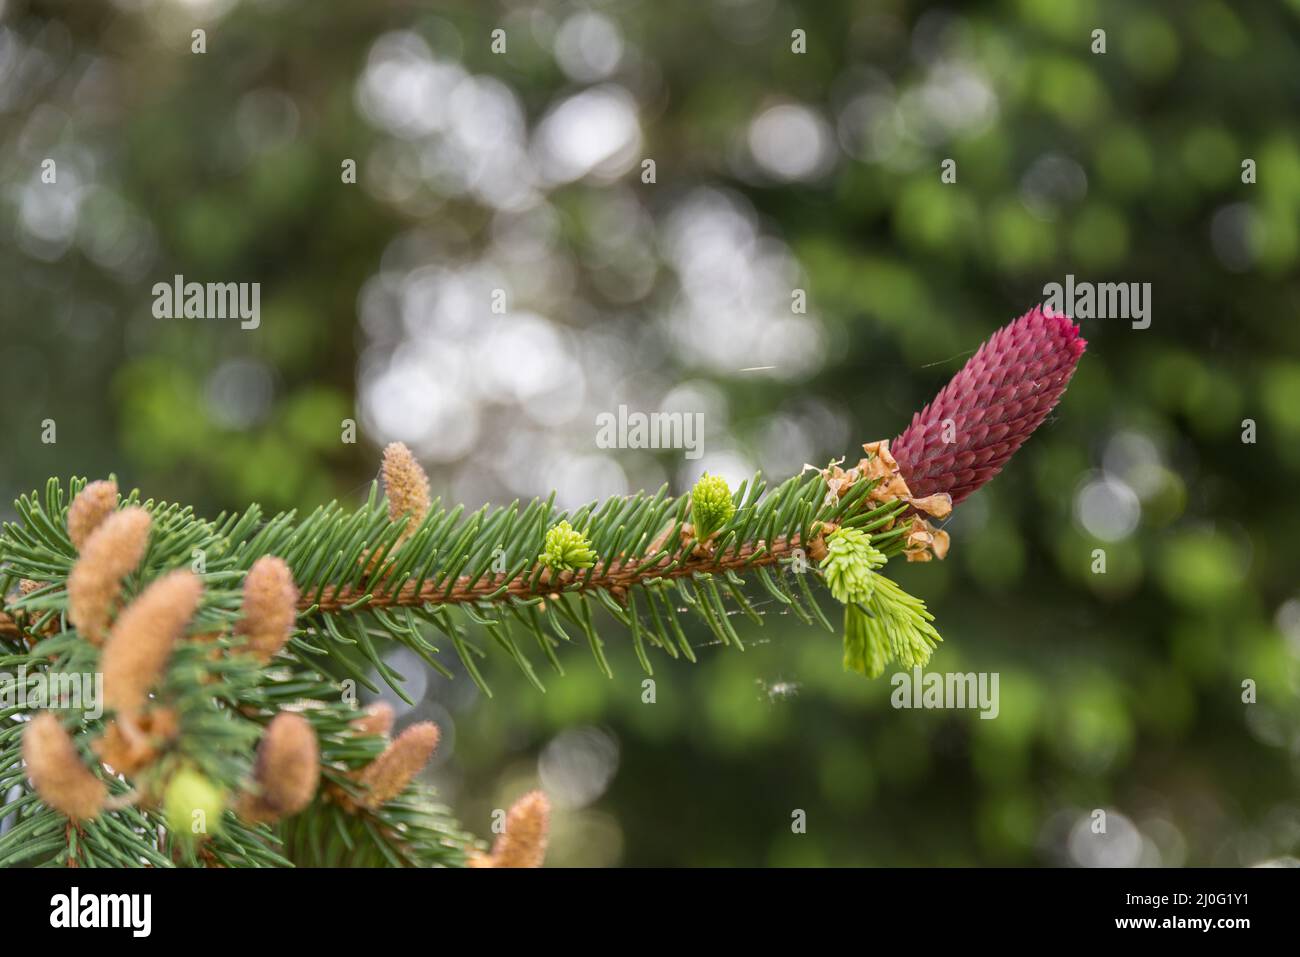 Norway spruce with flower bud - spruce cones growing Stock Photo